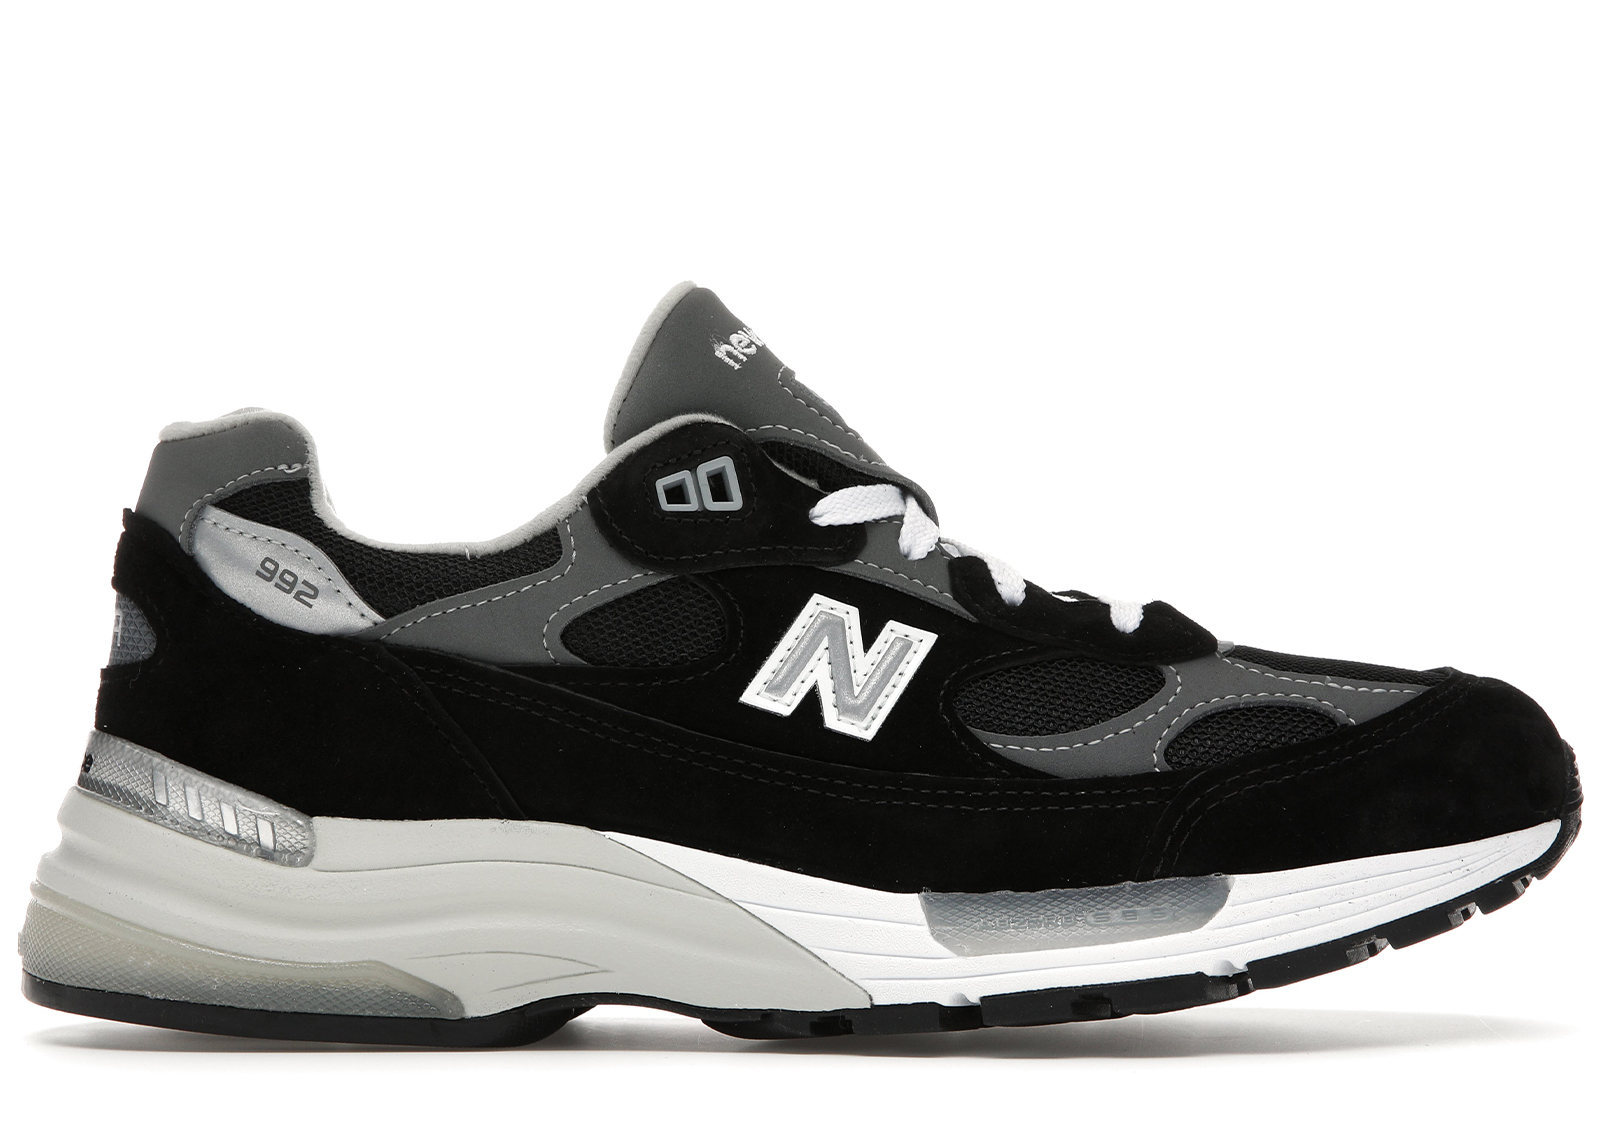 Buy New Balance 992 Shoes & Deadstock Sneakers